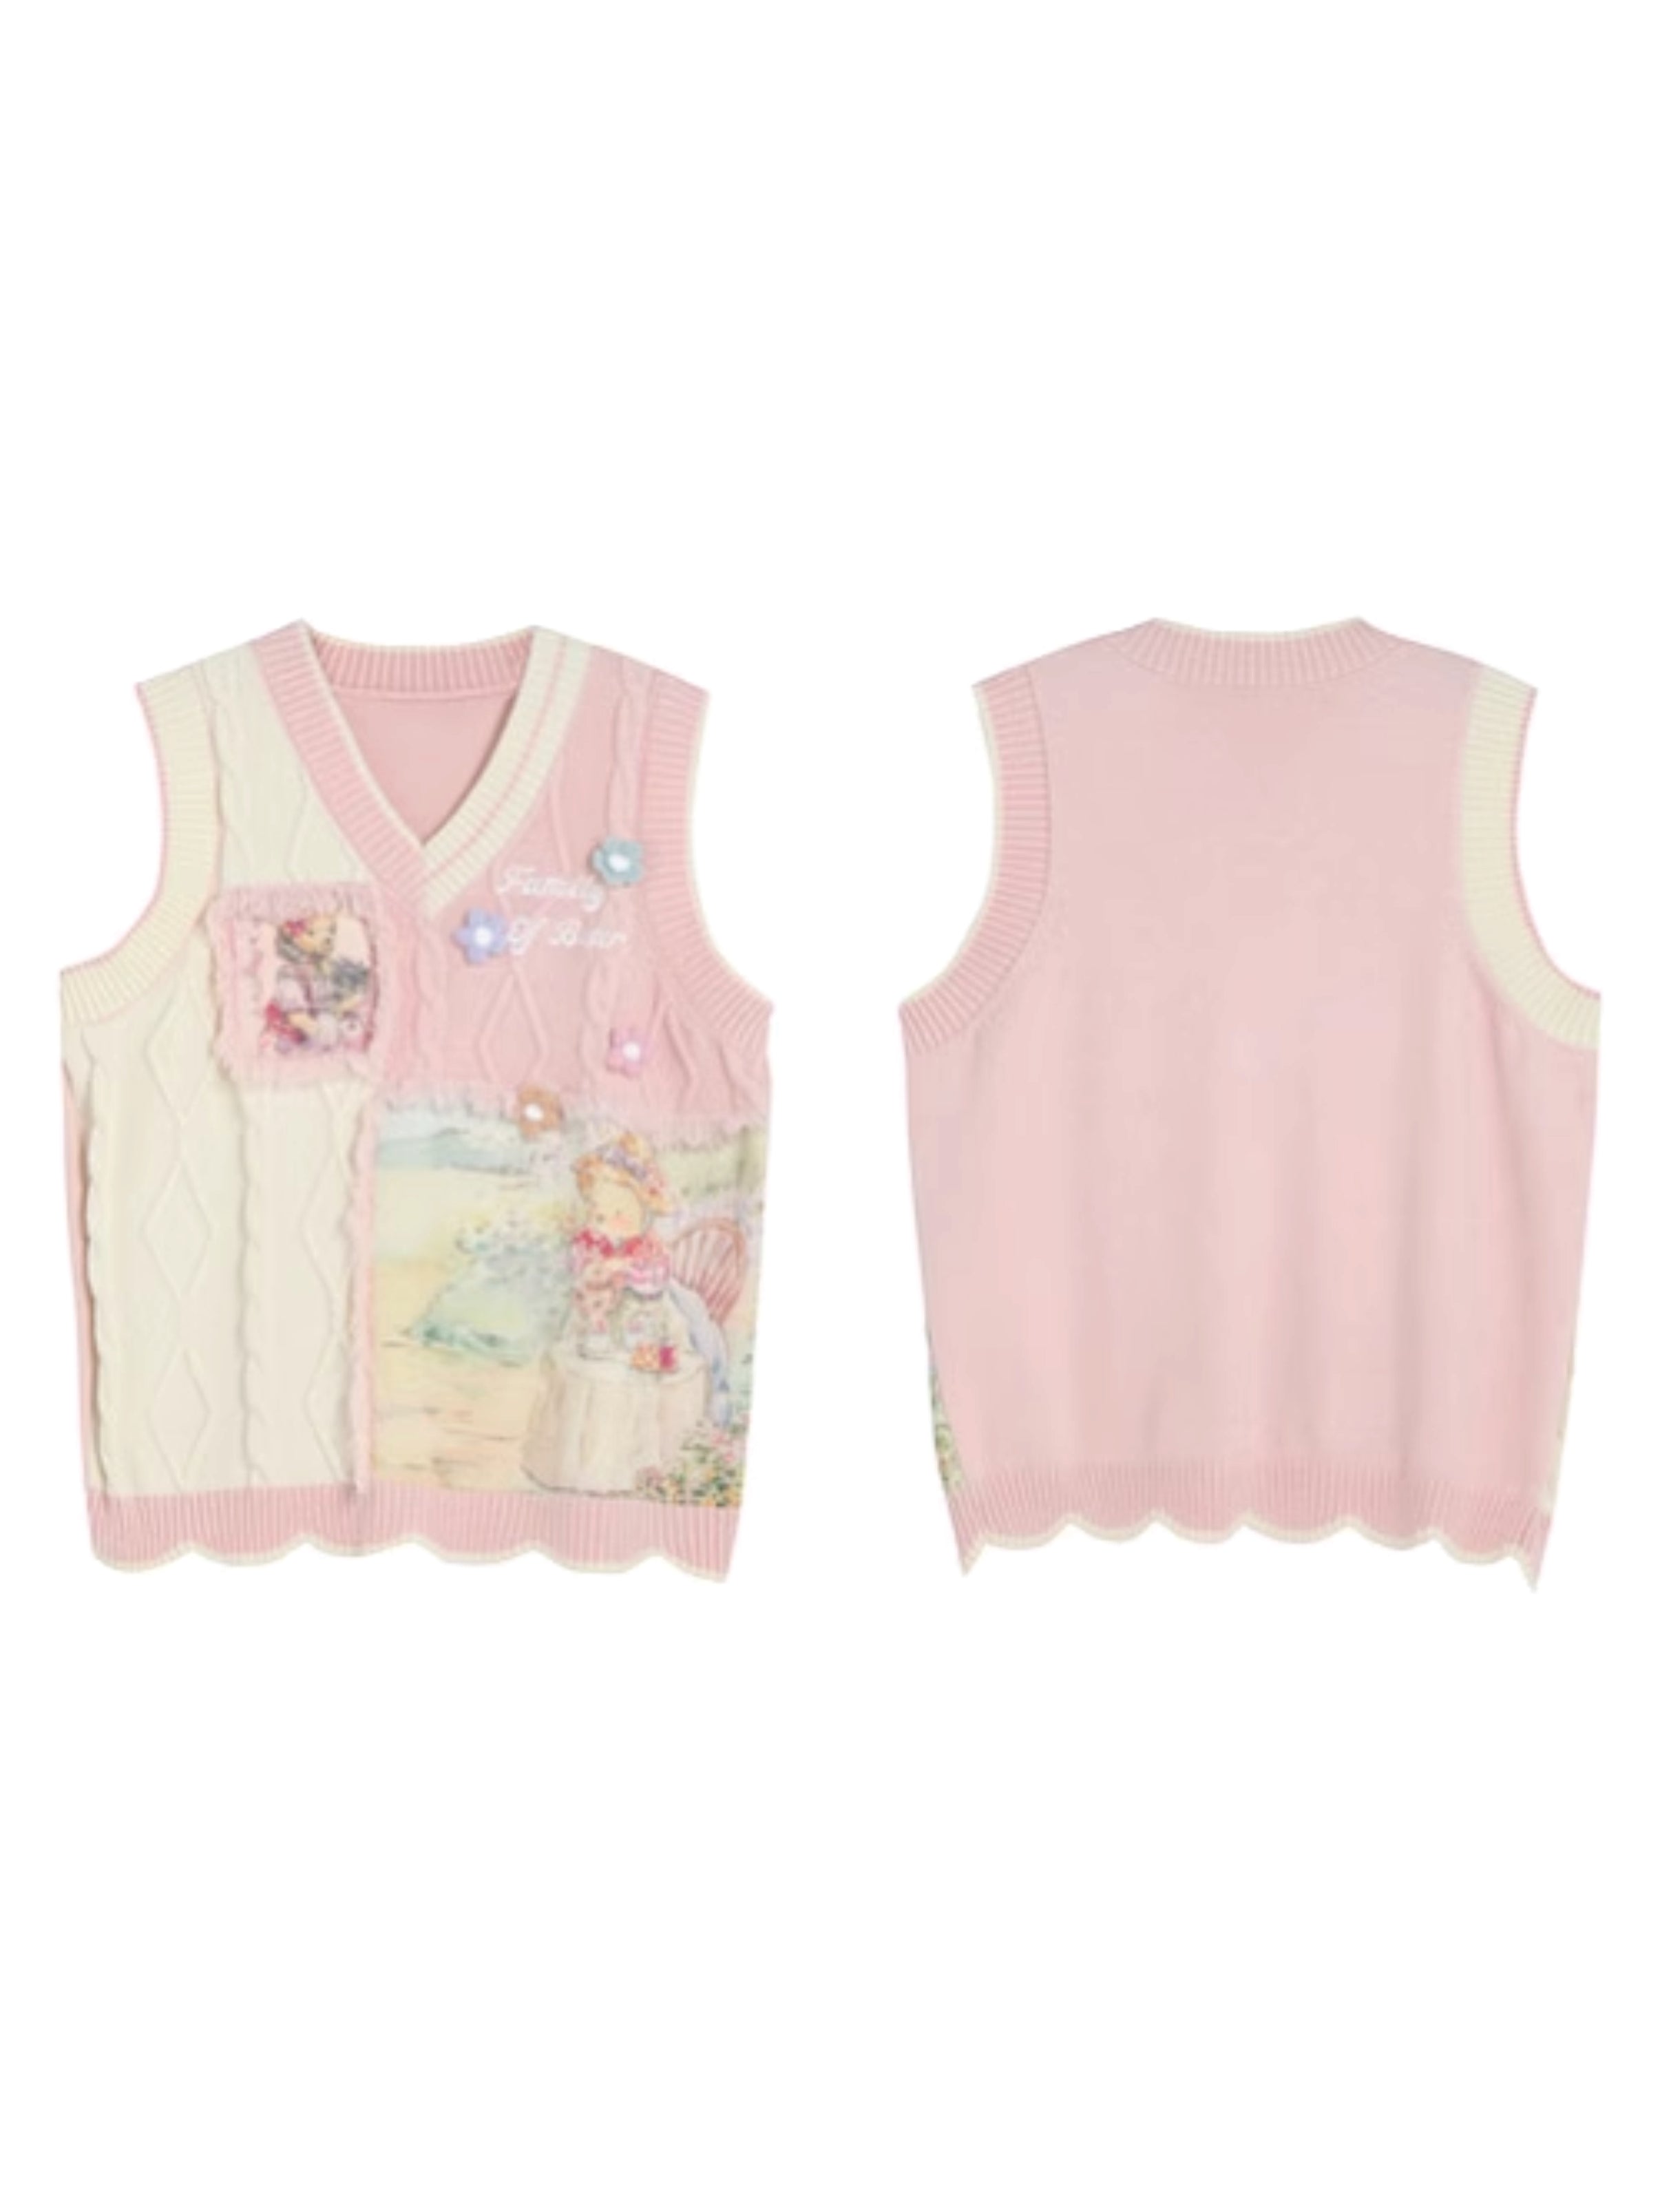 Family of Bears Cute Oil Painting Vest Knit-ntbhshop